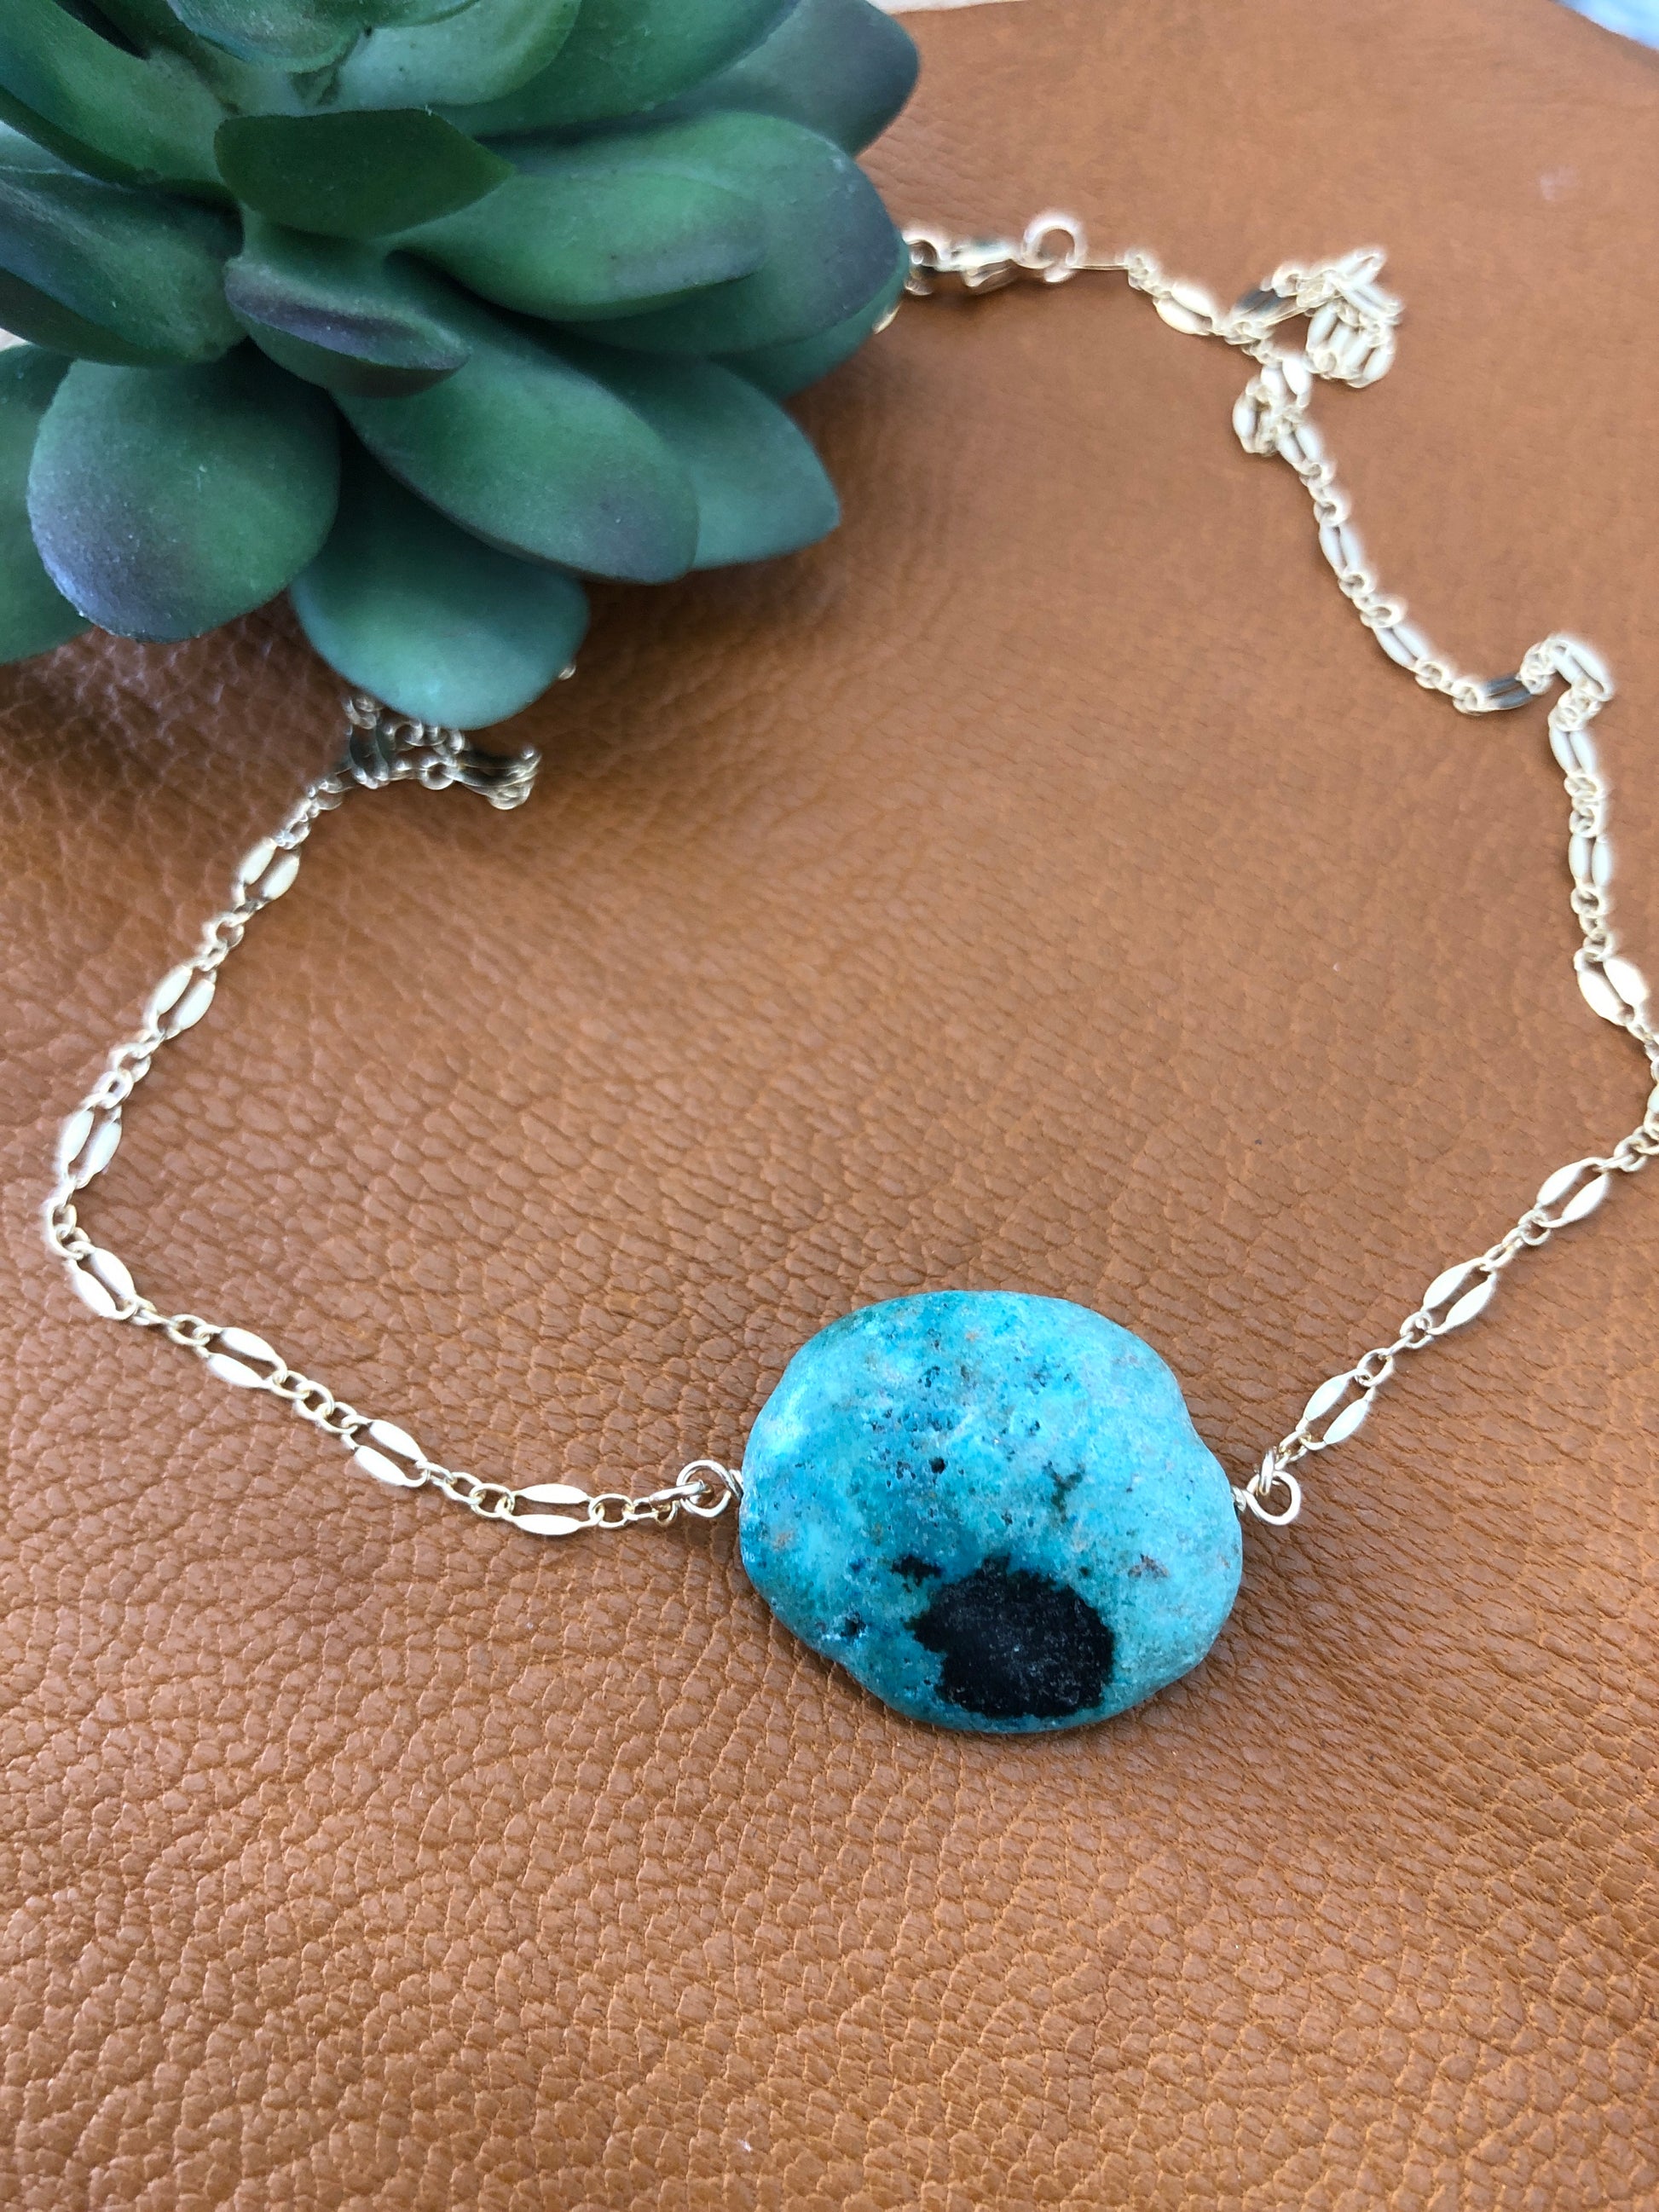 A 14k gold filled 18" lace necklace with a turquoise gemstone lays on a brown leather piece.